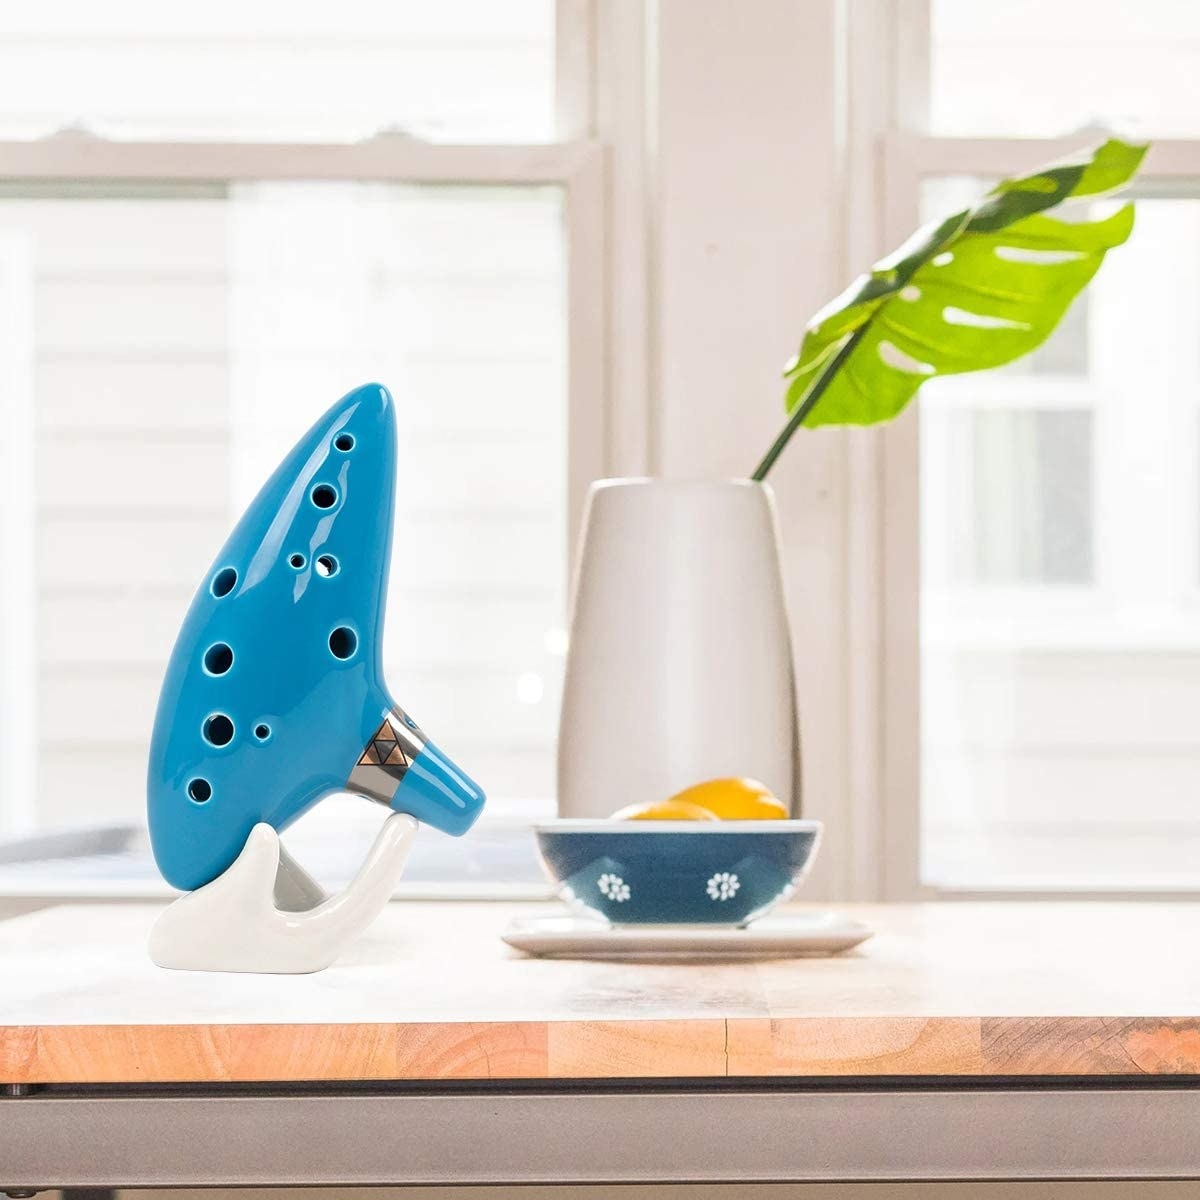 A ceramic Ocarina resting on a counter next to a vase